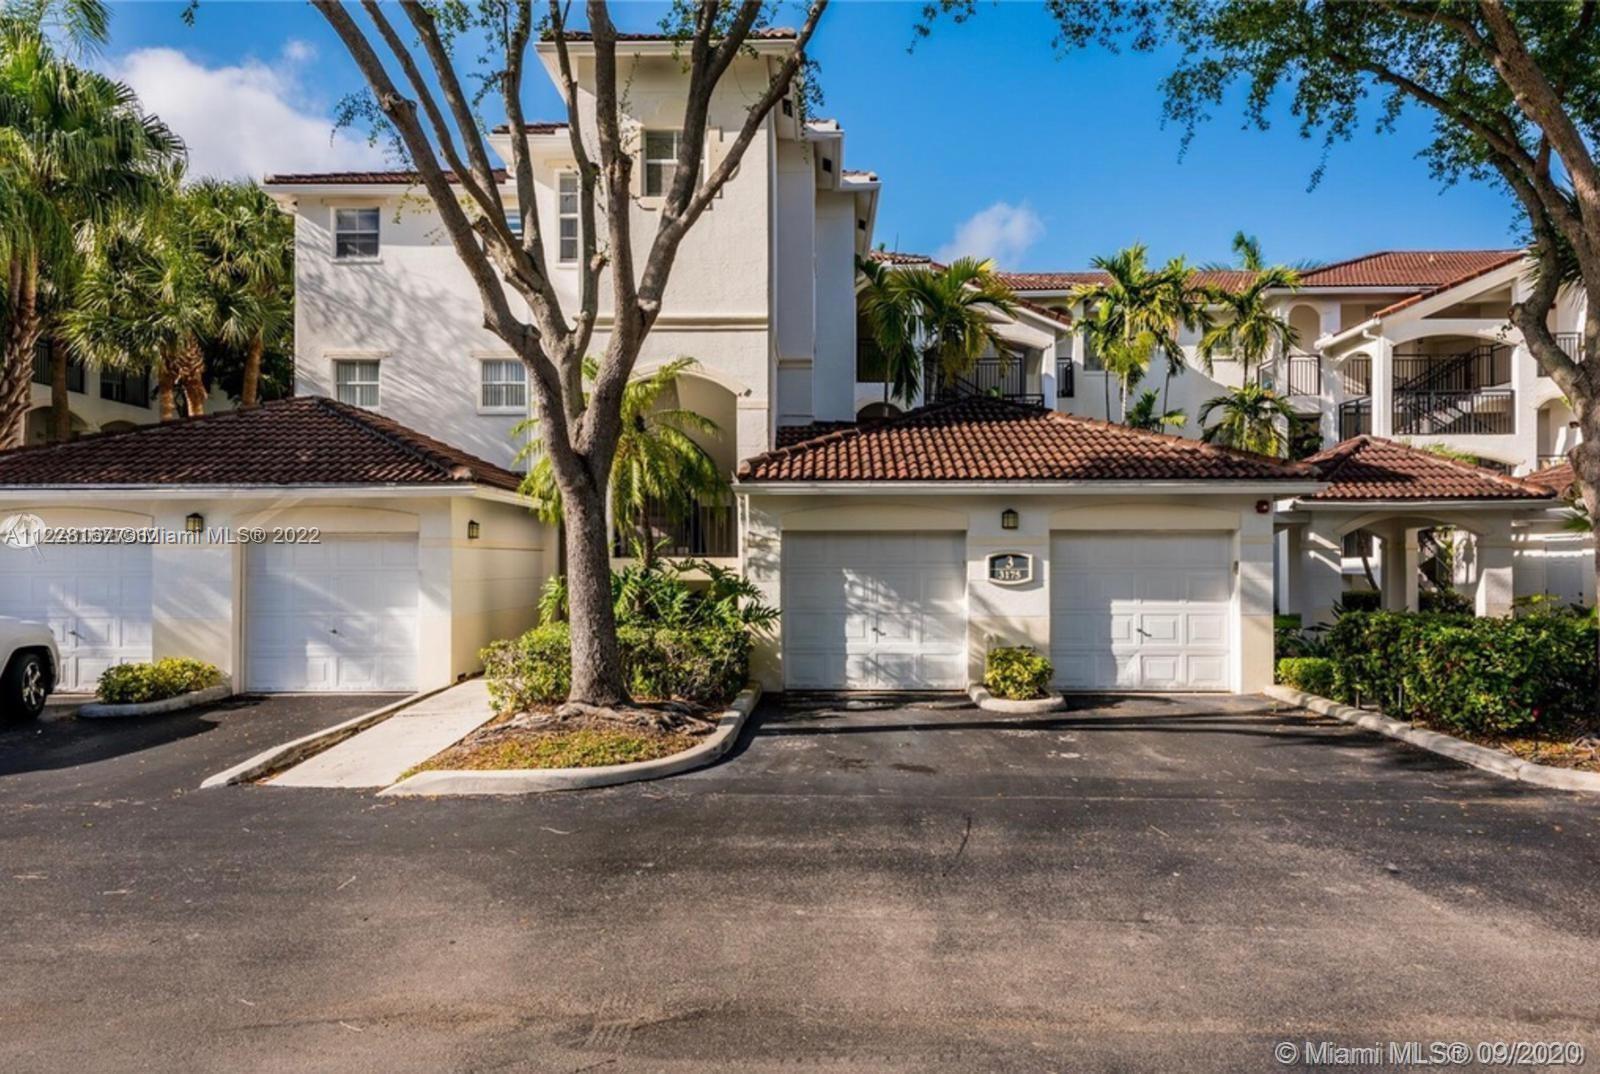 BEAUTIFUL 1 BED/1 BATH CONDO WITH ATTACHED PRIVATE GARAGE IN A RESORT STYLE GATED COMMUNITY IN THE H